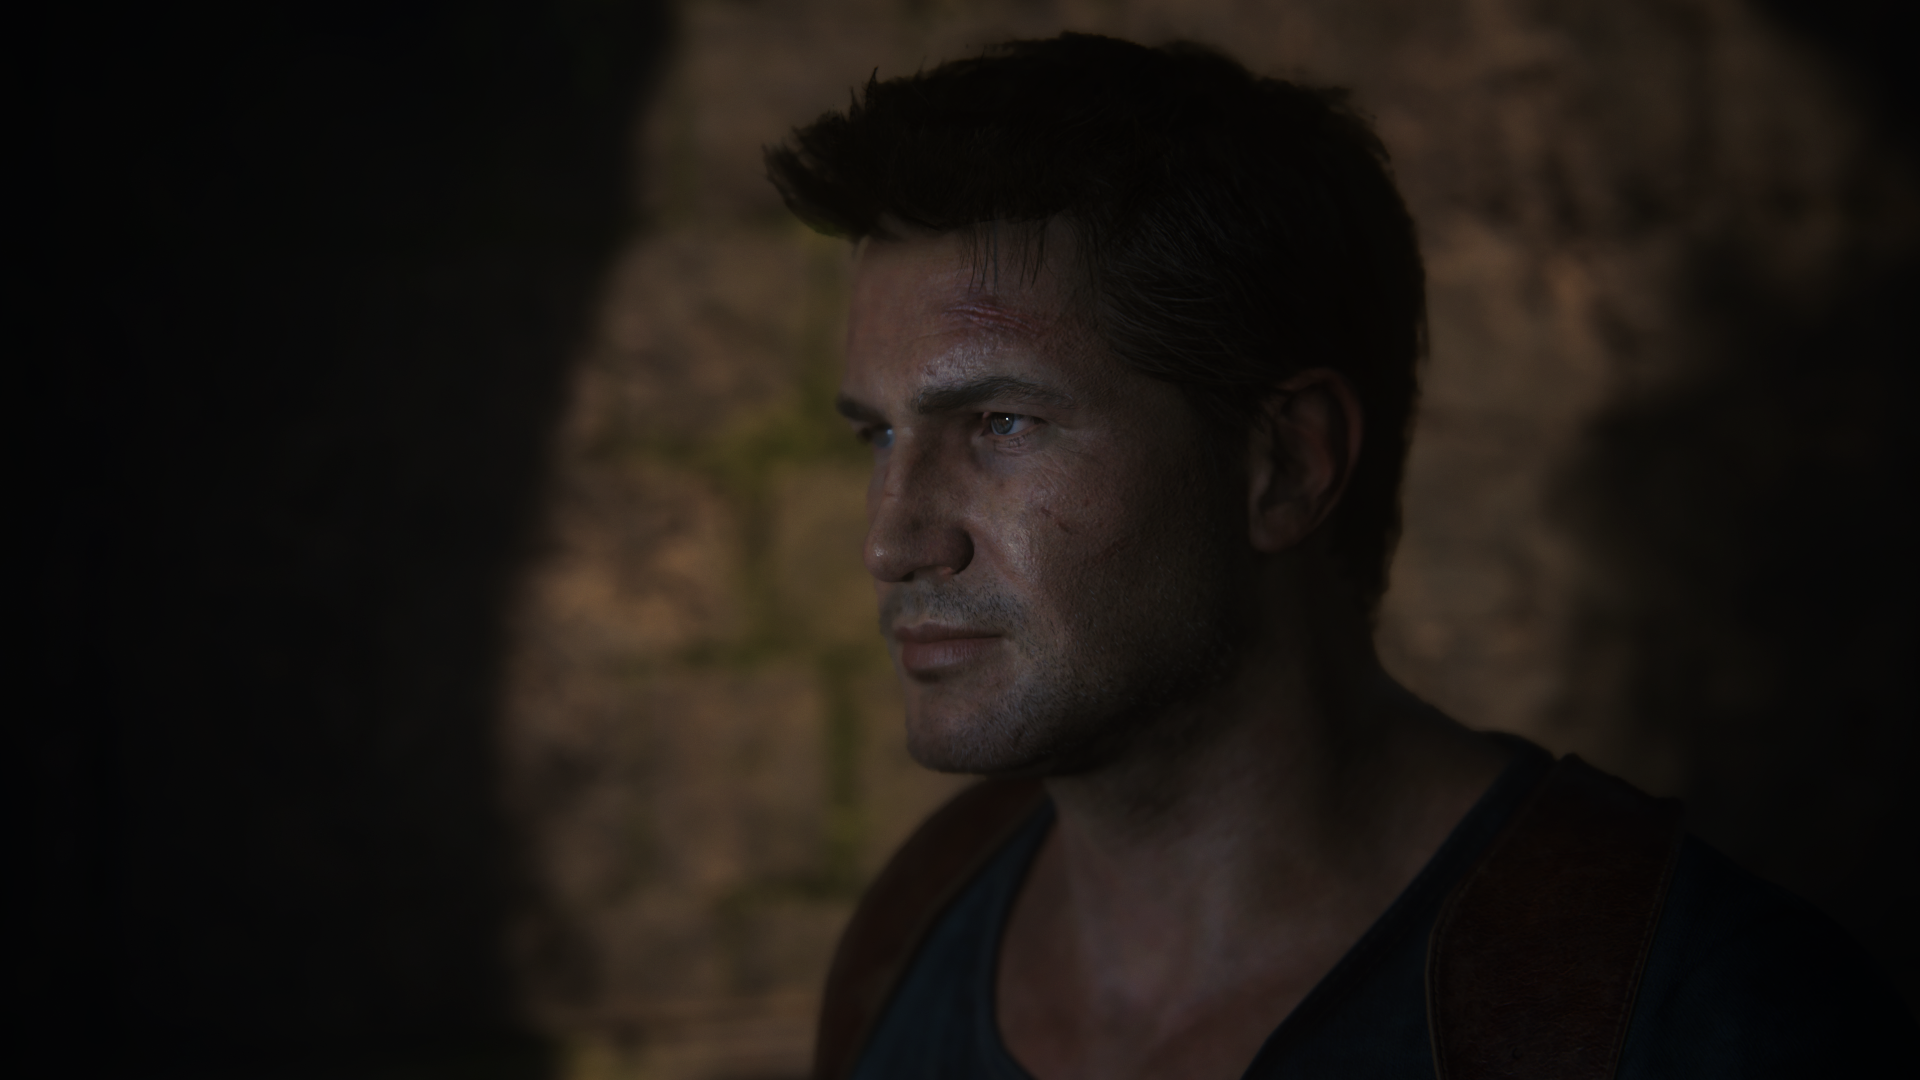 1f9Uncharted4AThiefsEnd.png